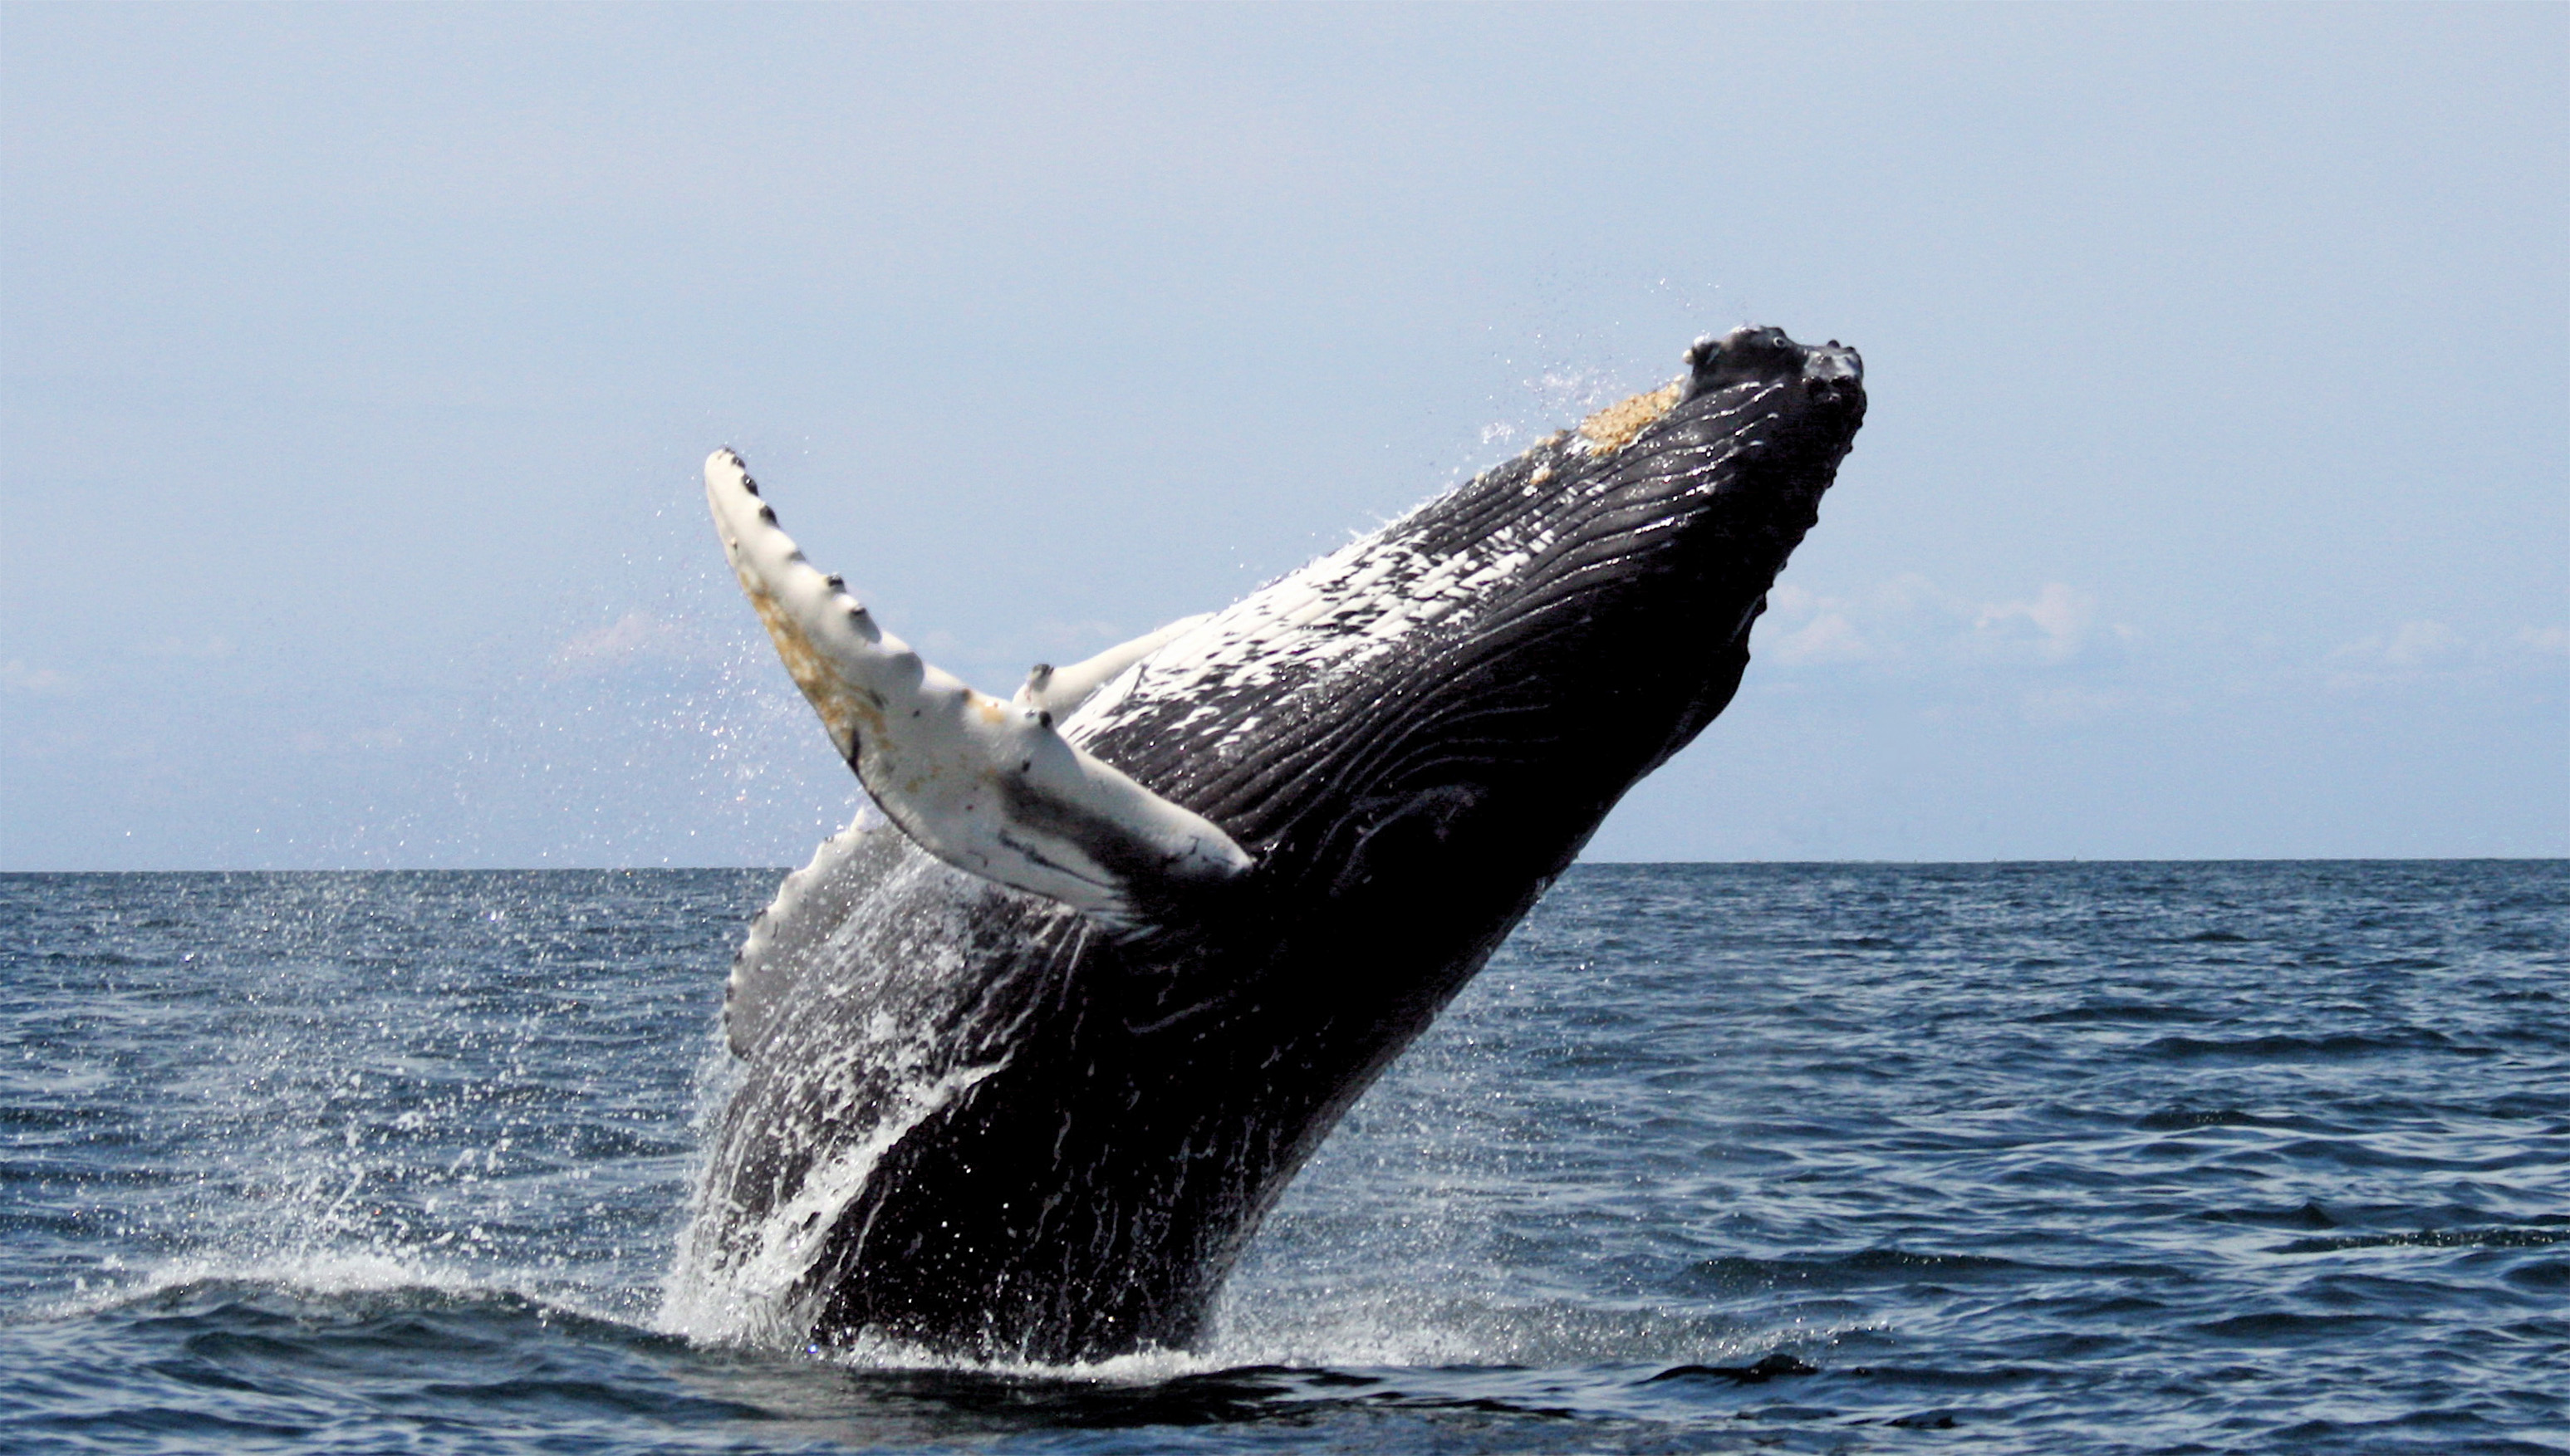 Whale jumping out of water